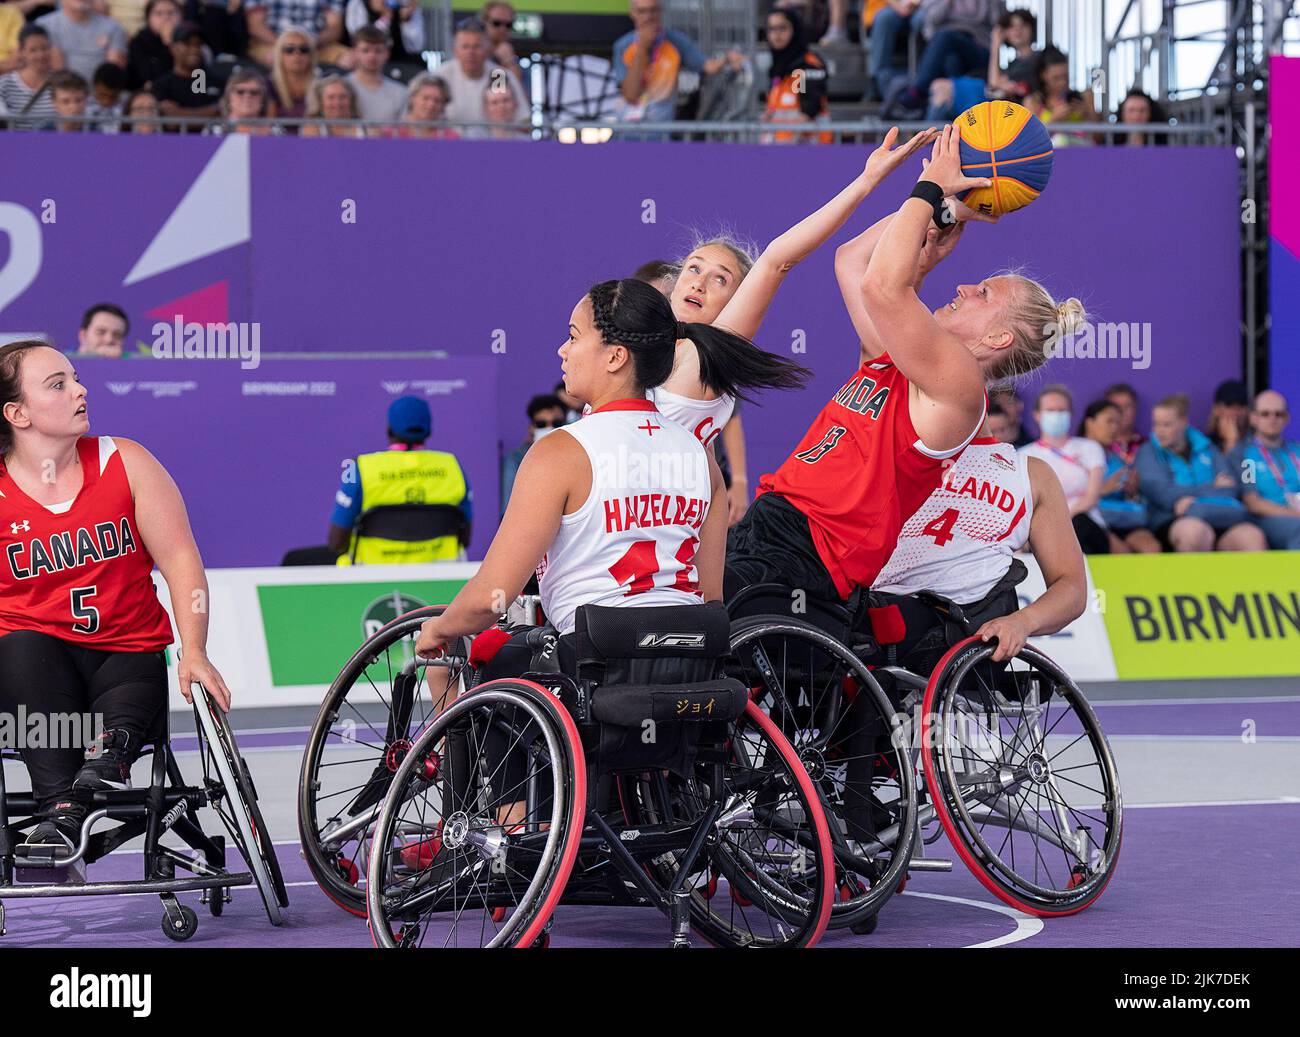 Birmingham, UK. 31st July, 2022. England's Amy Conroy defends as Canada's Kady Dandeneau shoots on the way to a 13-8 victory in women's 3x3 wheelchair basketball action at the Commonwealth Games in Birmingham, England on Sunday, July 31, 2022. THE CANADIAN PRESS/Andrew Vaughan Credit: The Canadian Press/Alamy Live News Stock Photo